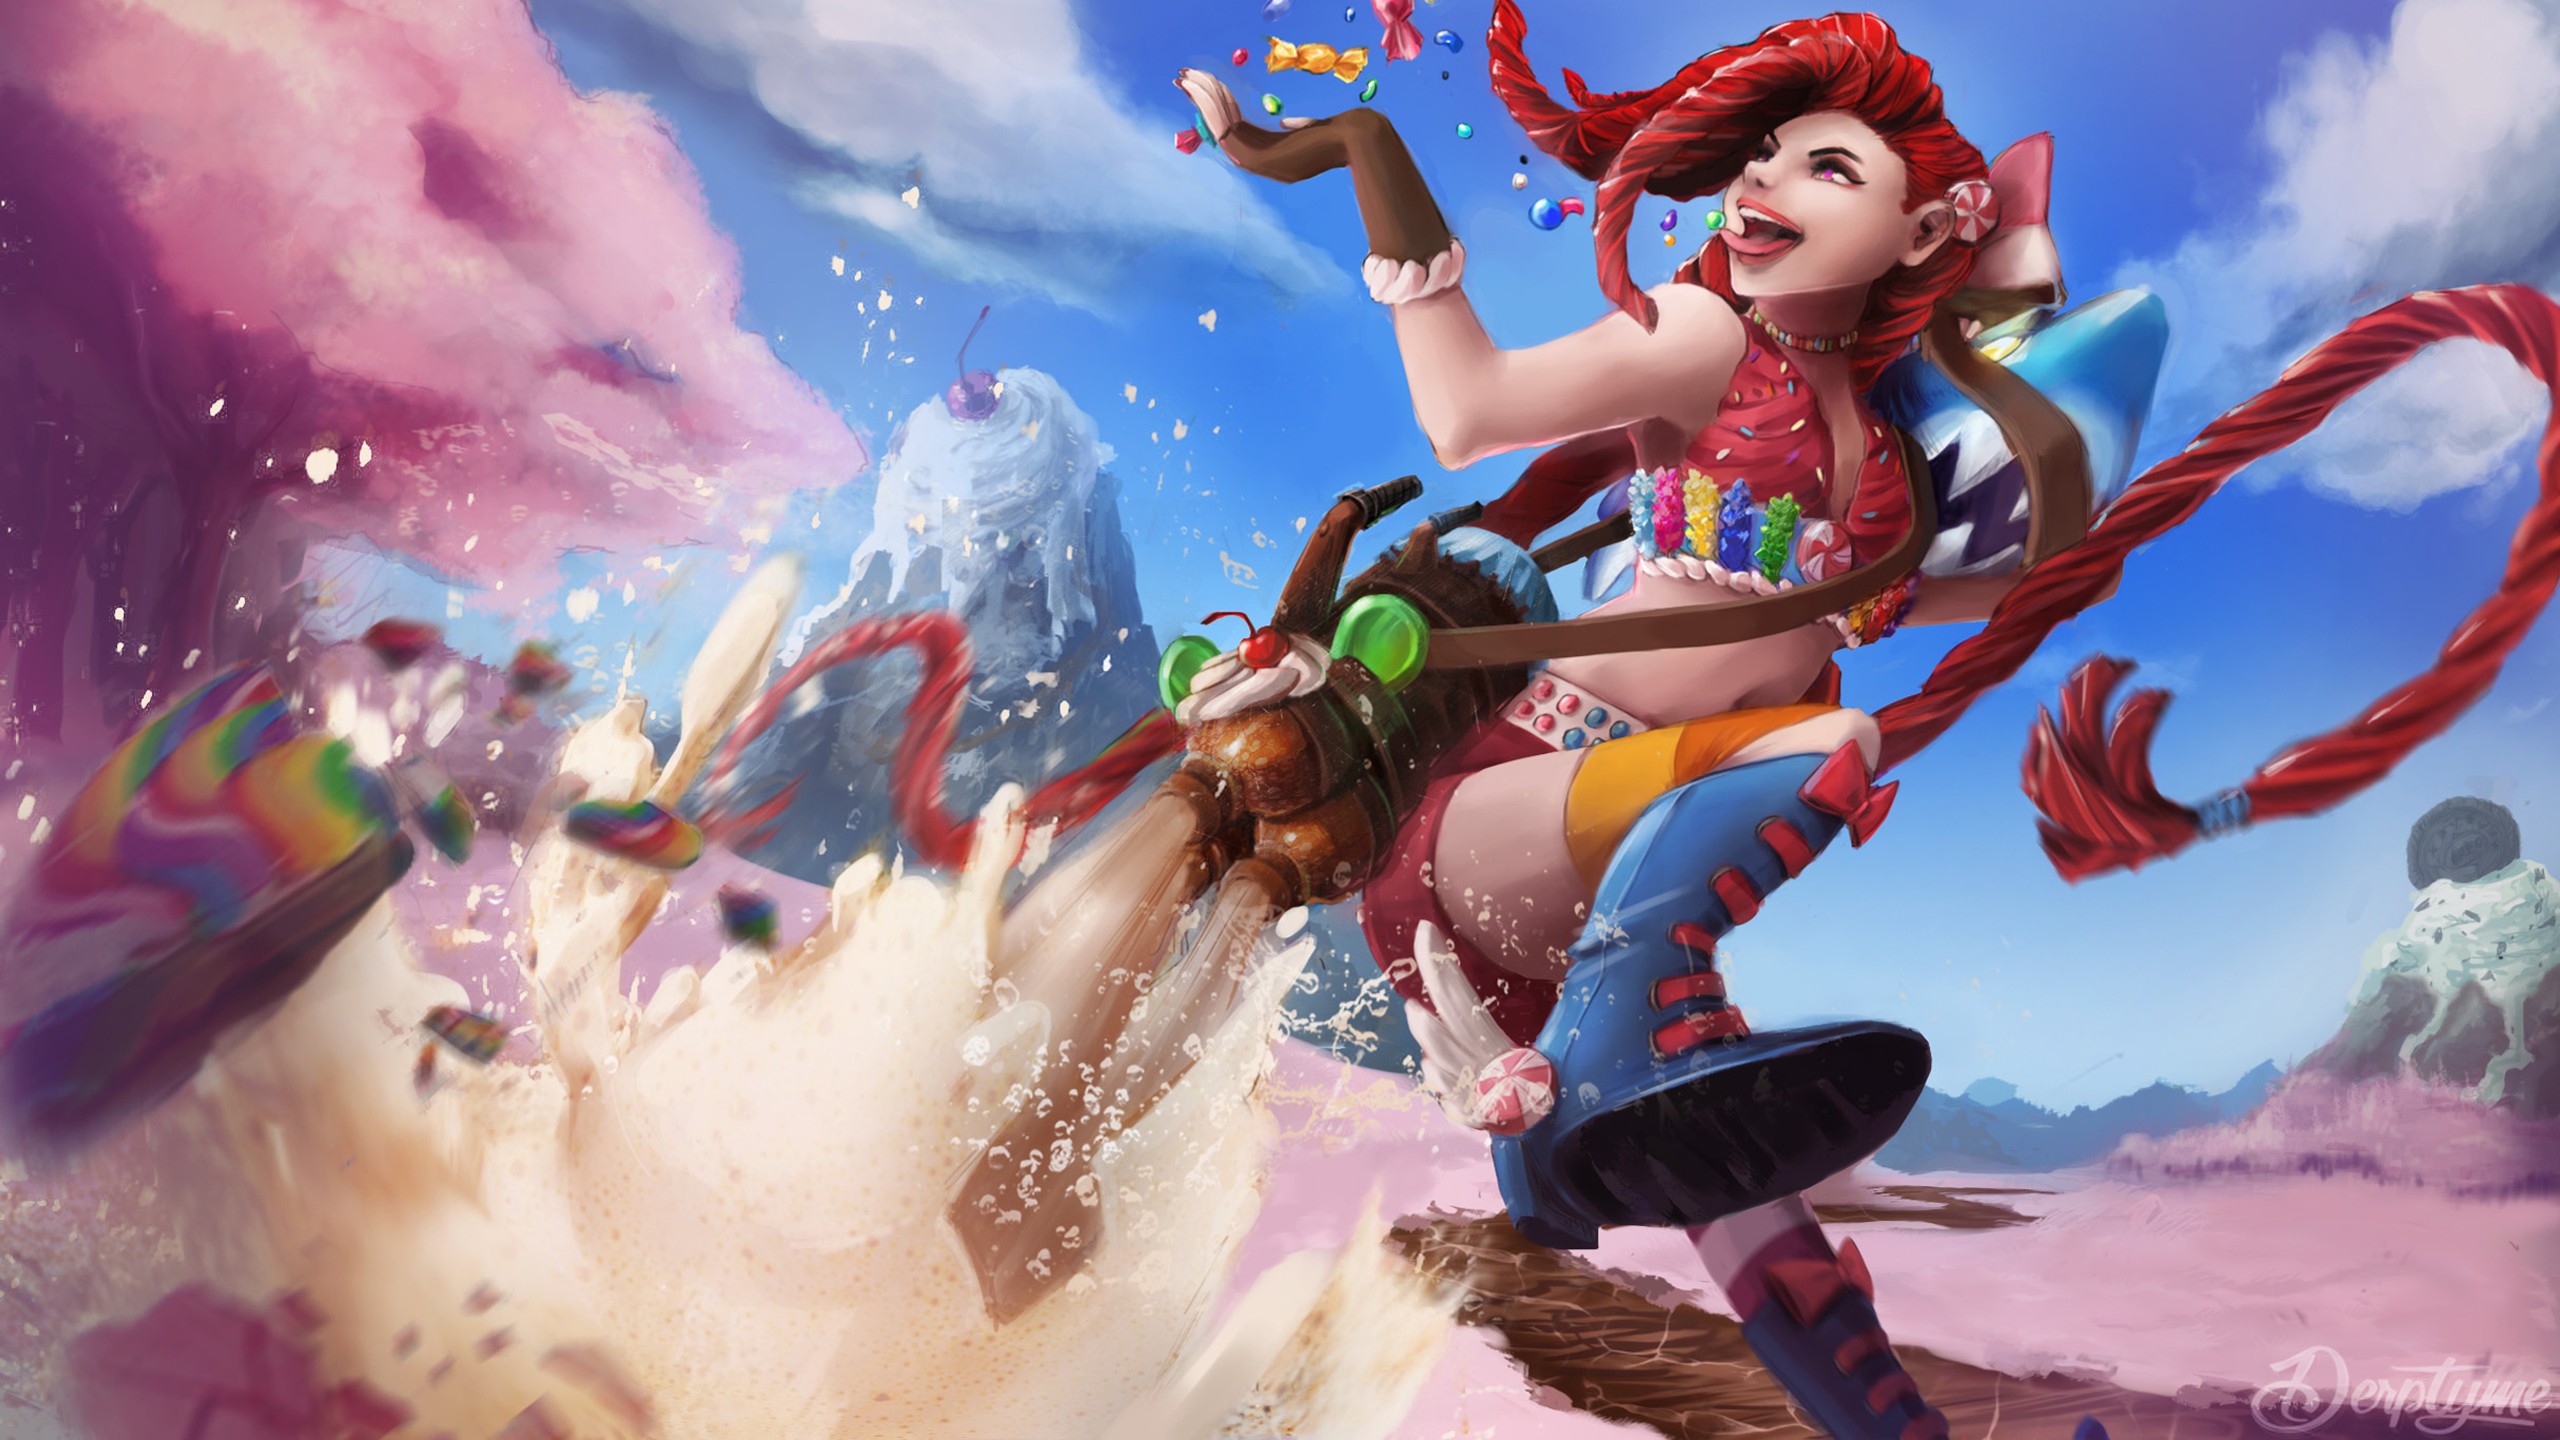 General 2560x1440 Jinx (League of Legends) League of Legends PC gaming redhead tongue out video game characters tongues long hair colorful video game art video game girls